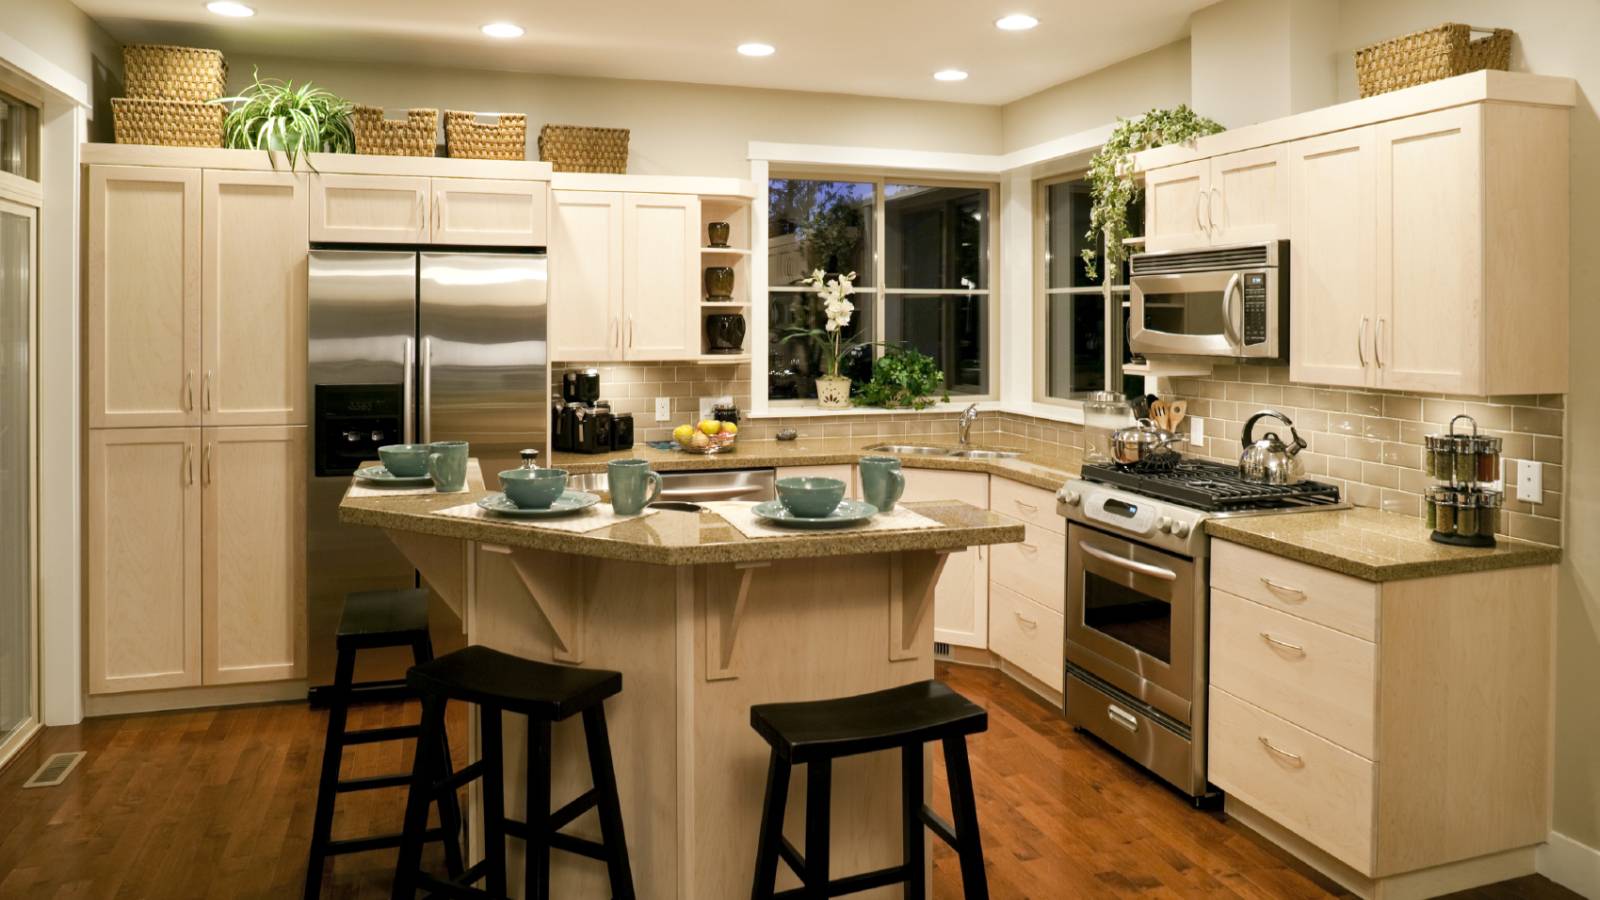 Does Your House Need a Kitchen Remodel?